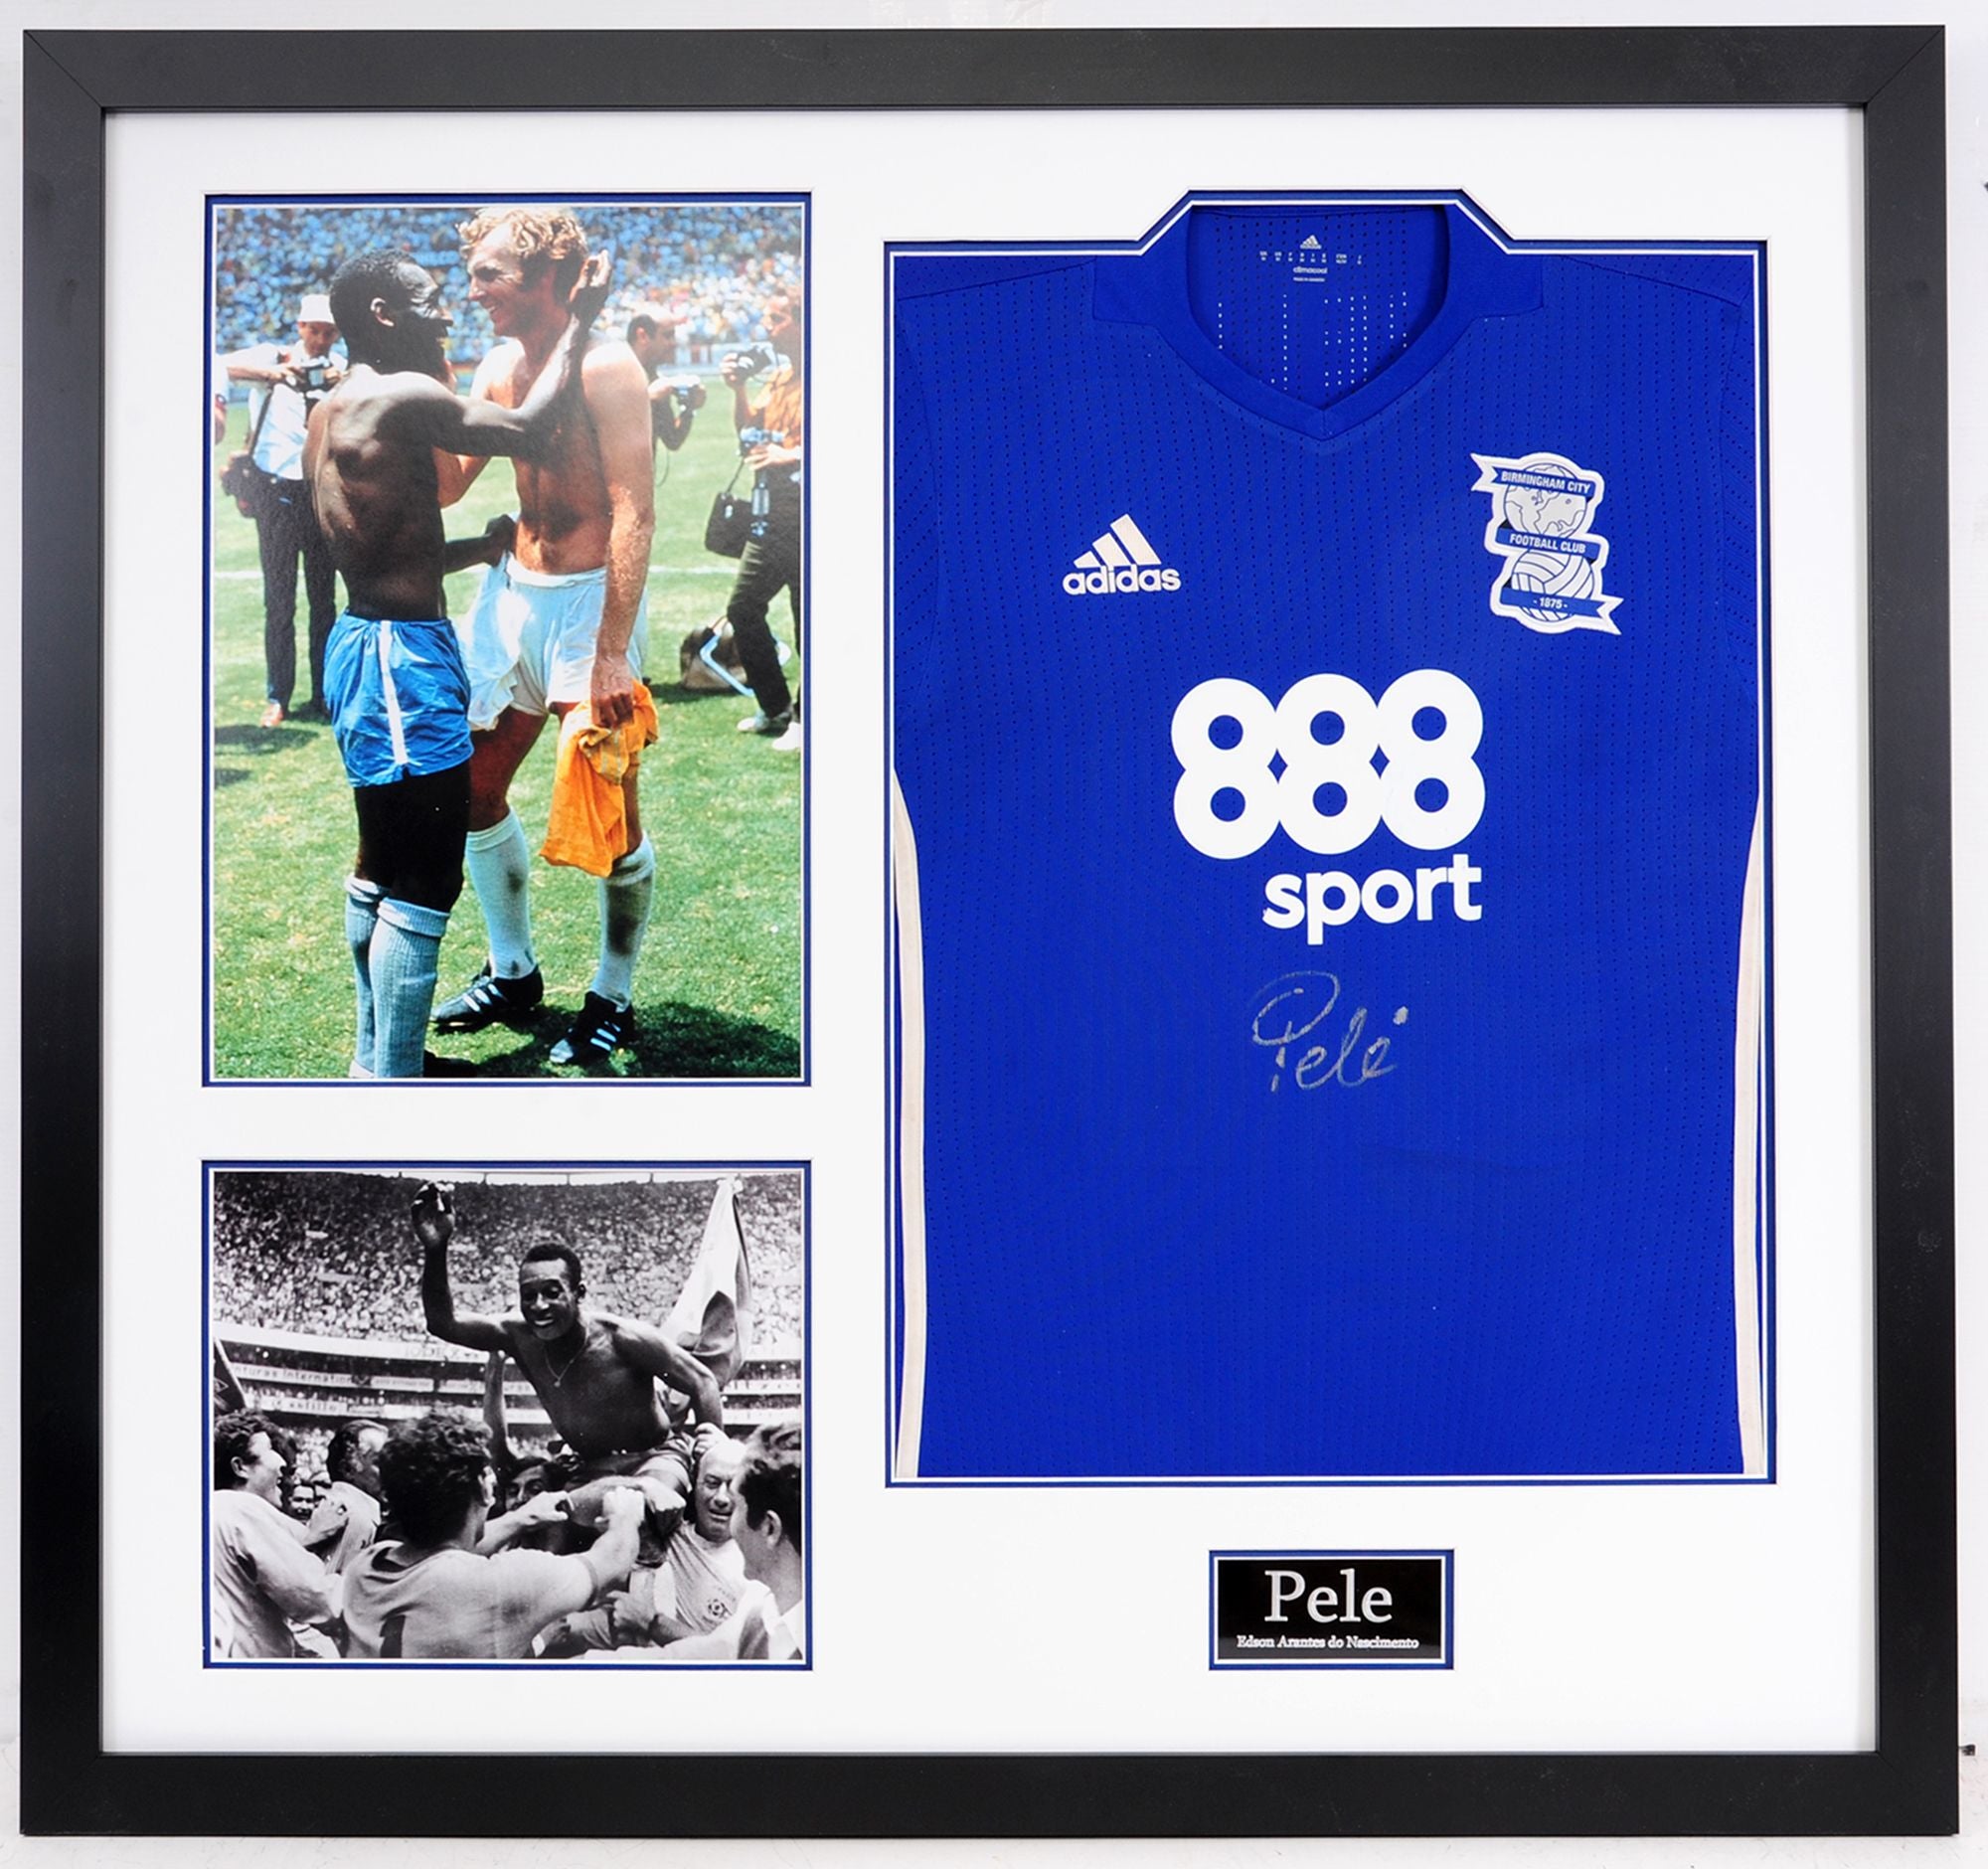 Pele Signed and Framed Birmingham City Shirt - Incredible piece